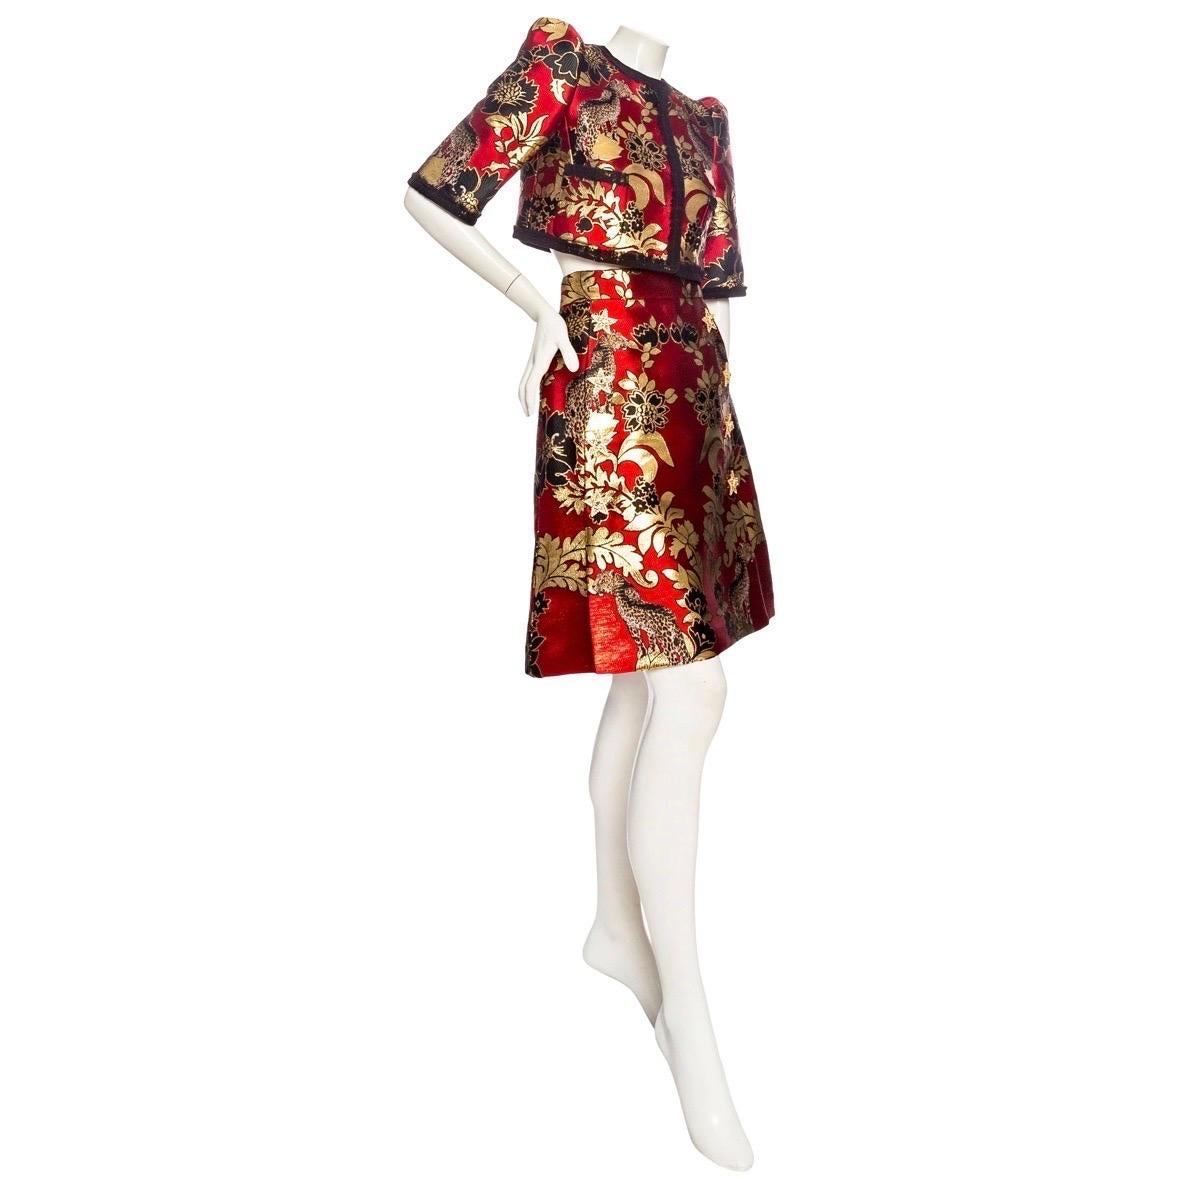 Dolce & Gabbana Gold and Red Leopard Motif Jacquard Jacket and Skirt Set

Red/Black/Gold
Set includes half-sleeve jacket and skirt
Jacket features a puffed sleeve, contrasting tulle trim, front patch pockets, a high round neckline, snap button front